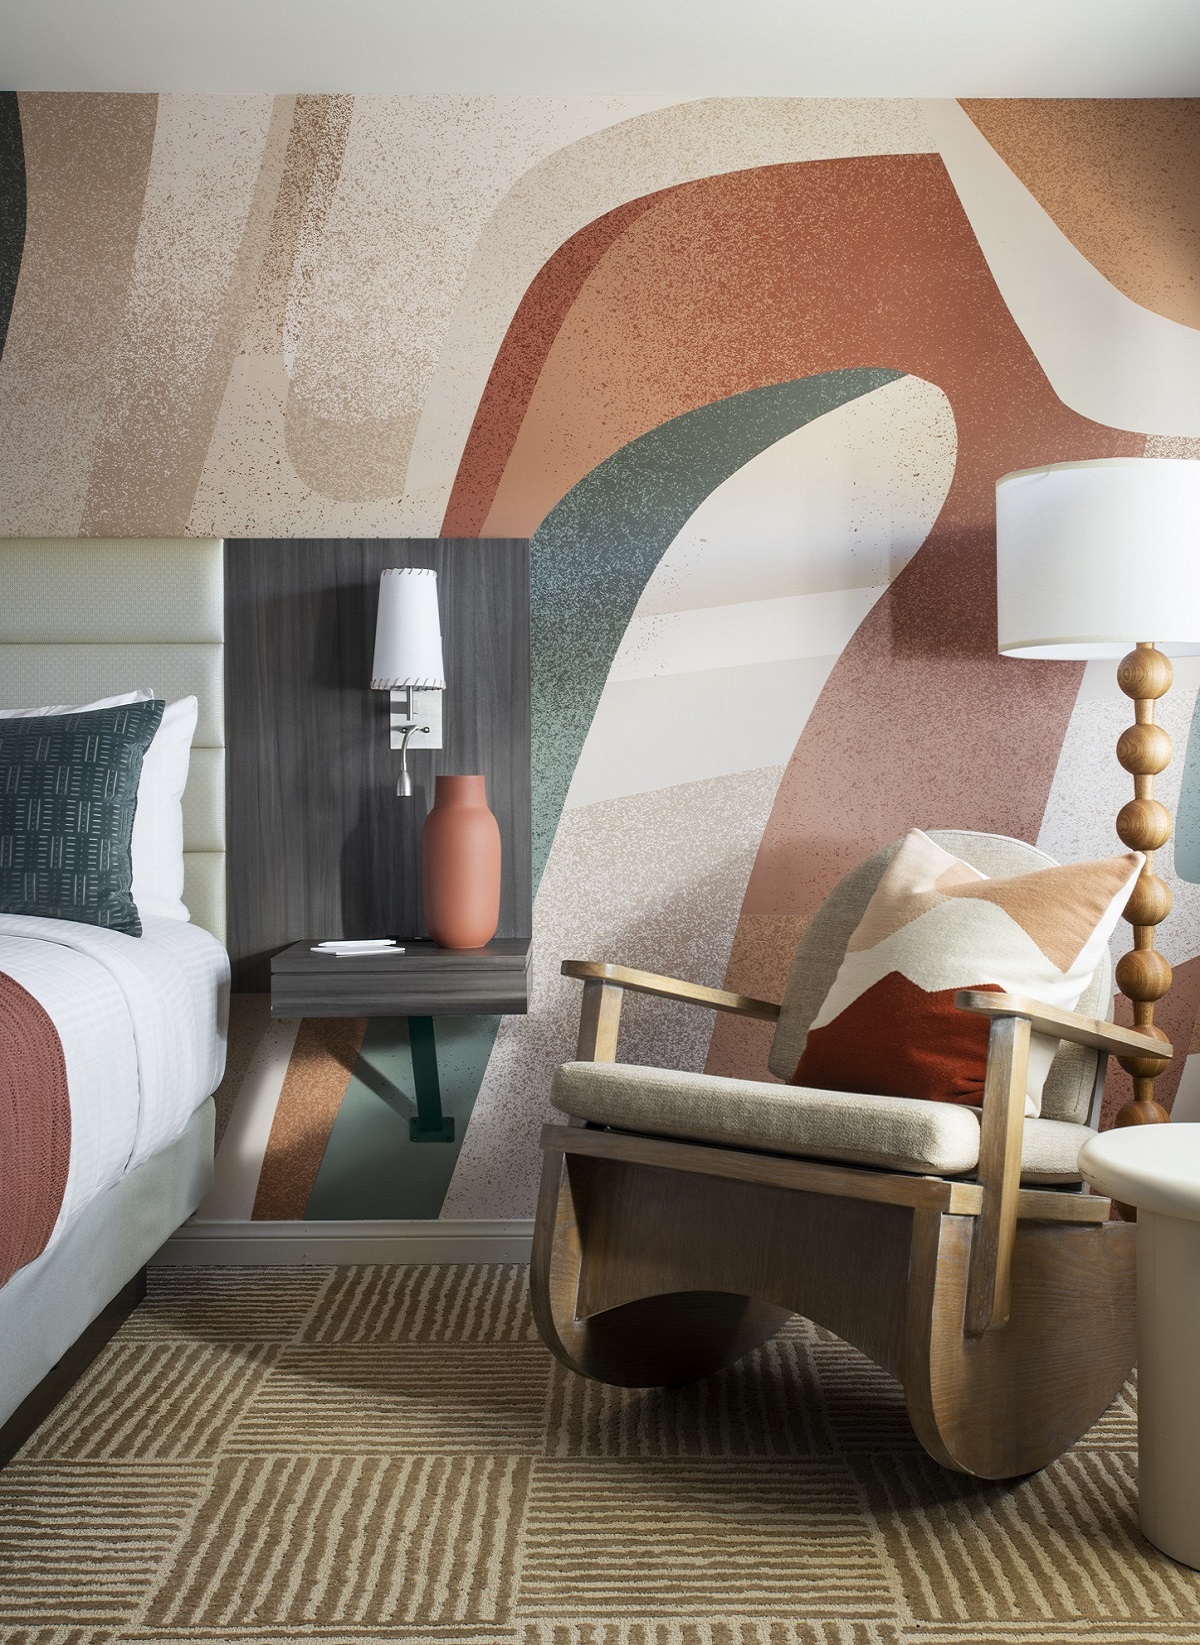 wooden rocking chair and lamp detail with painted wall mural behind